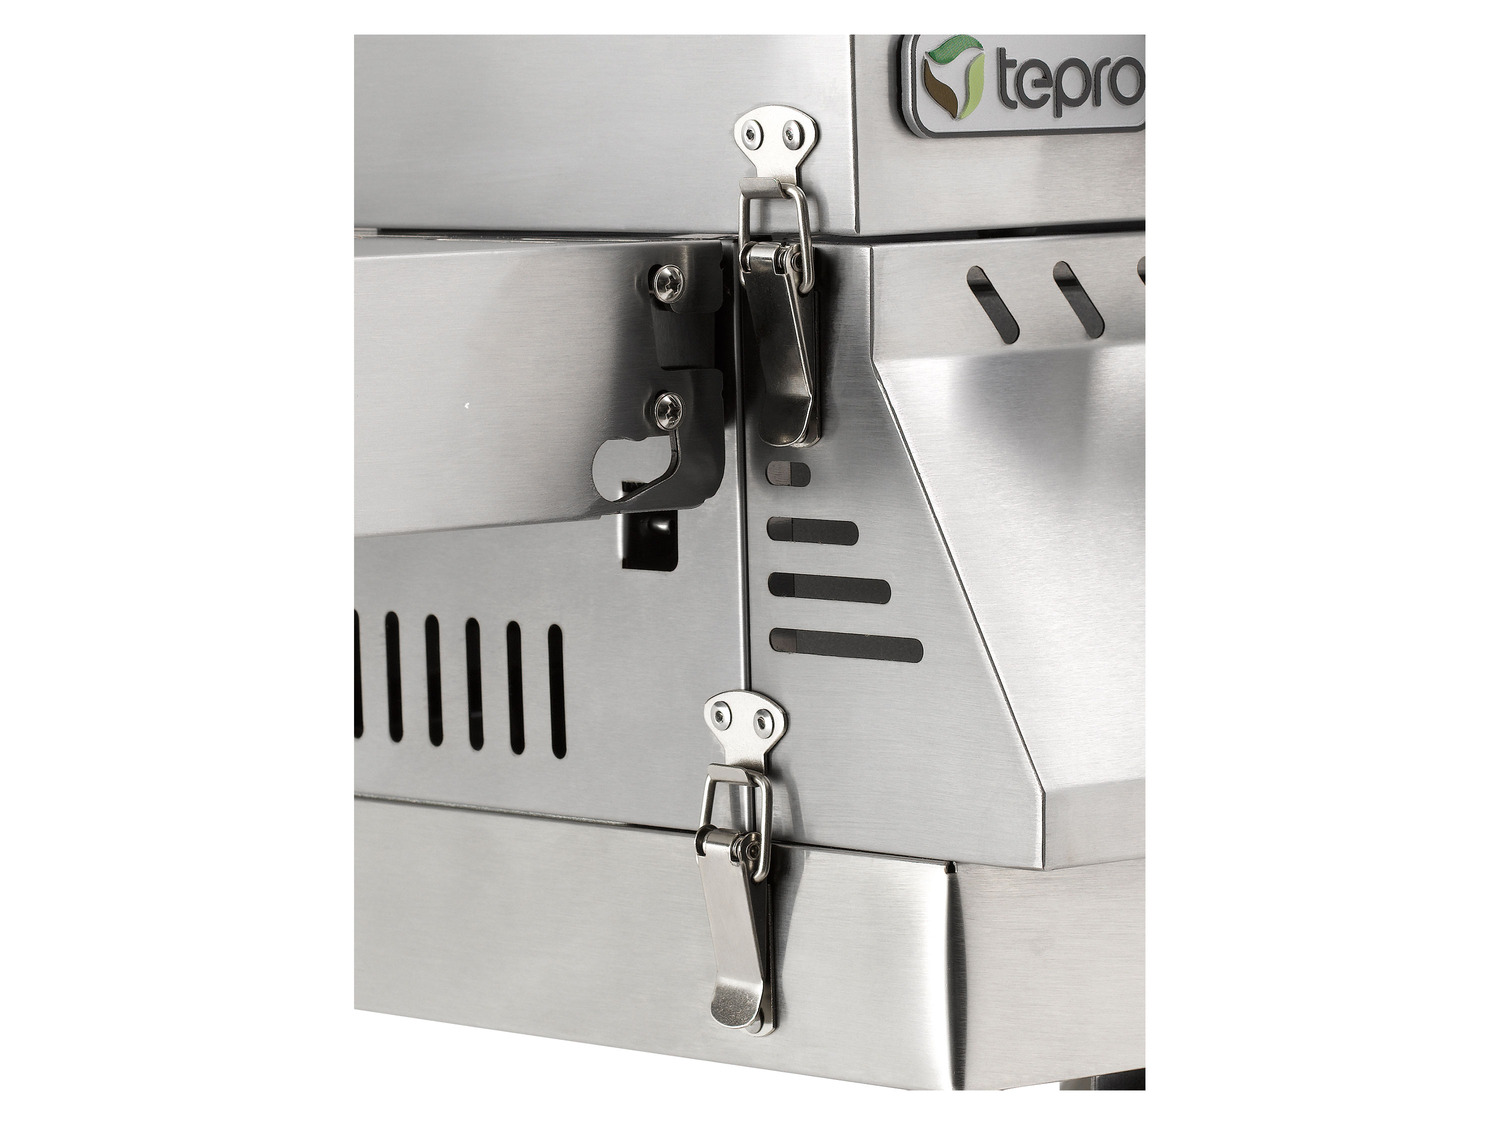 tepro Gasgrill Brenner, 3 9… Special »Chicago« Edition